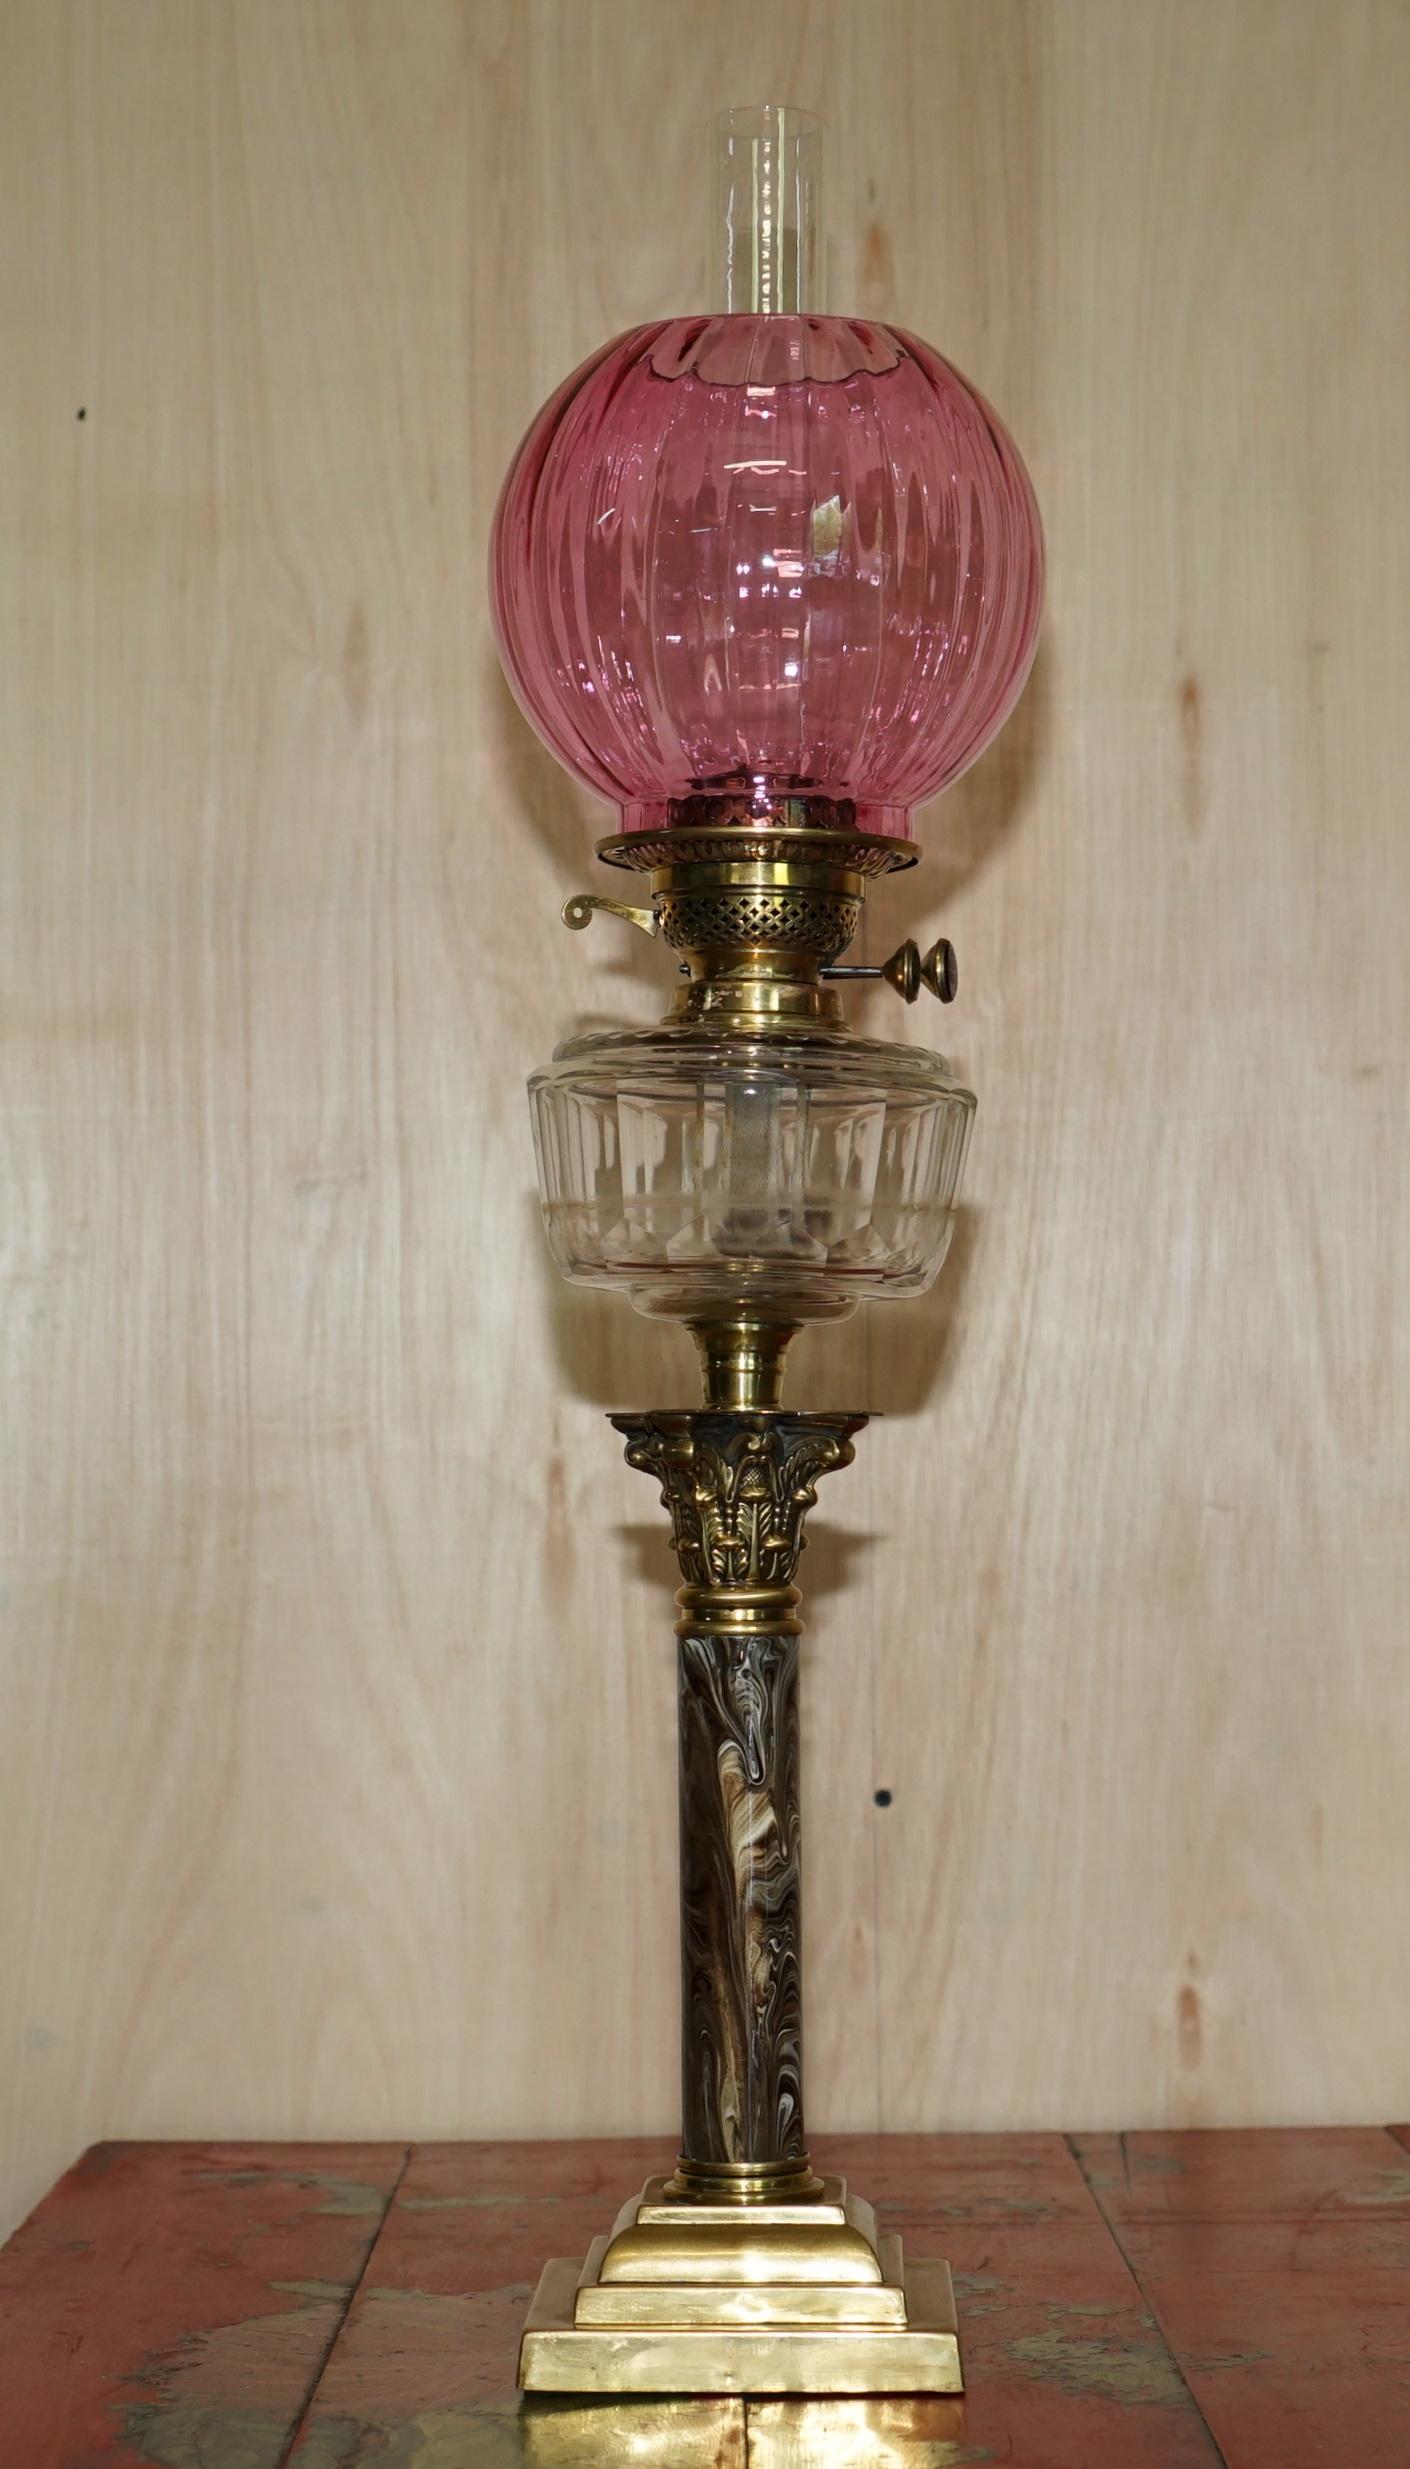 We are delighted to offer for sale this stunning pair of Victorian, Corinthian pillar oil lamps with marbled bases and ruby glass shades

I have a suite of seven Victorian oil lamps, this is the only pair

The lamps have a traditional Italian